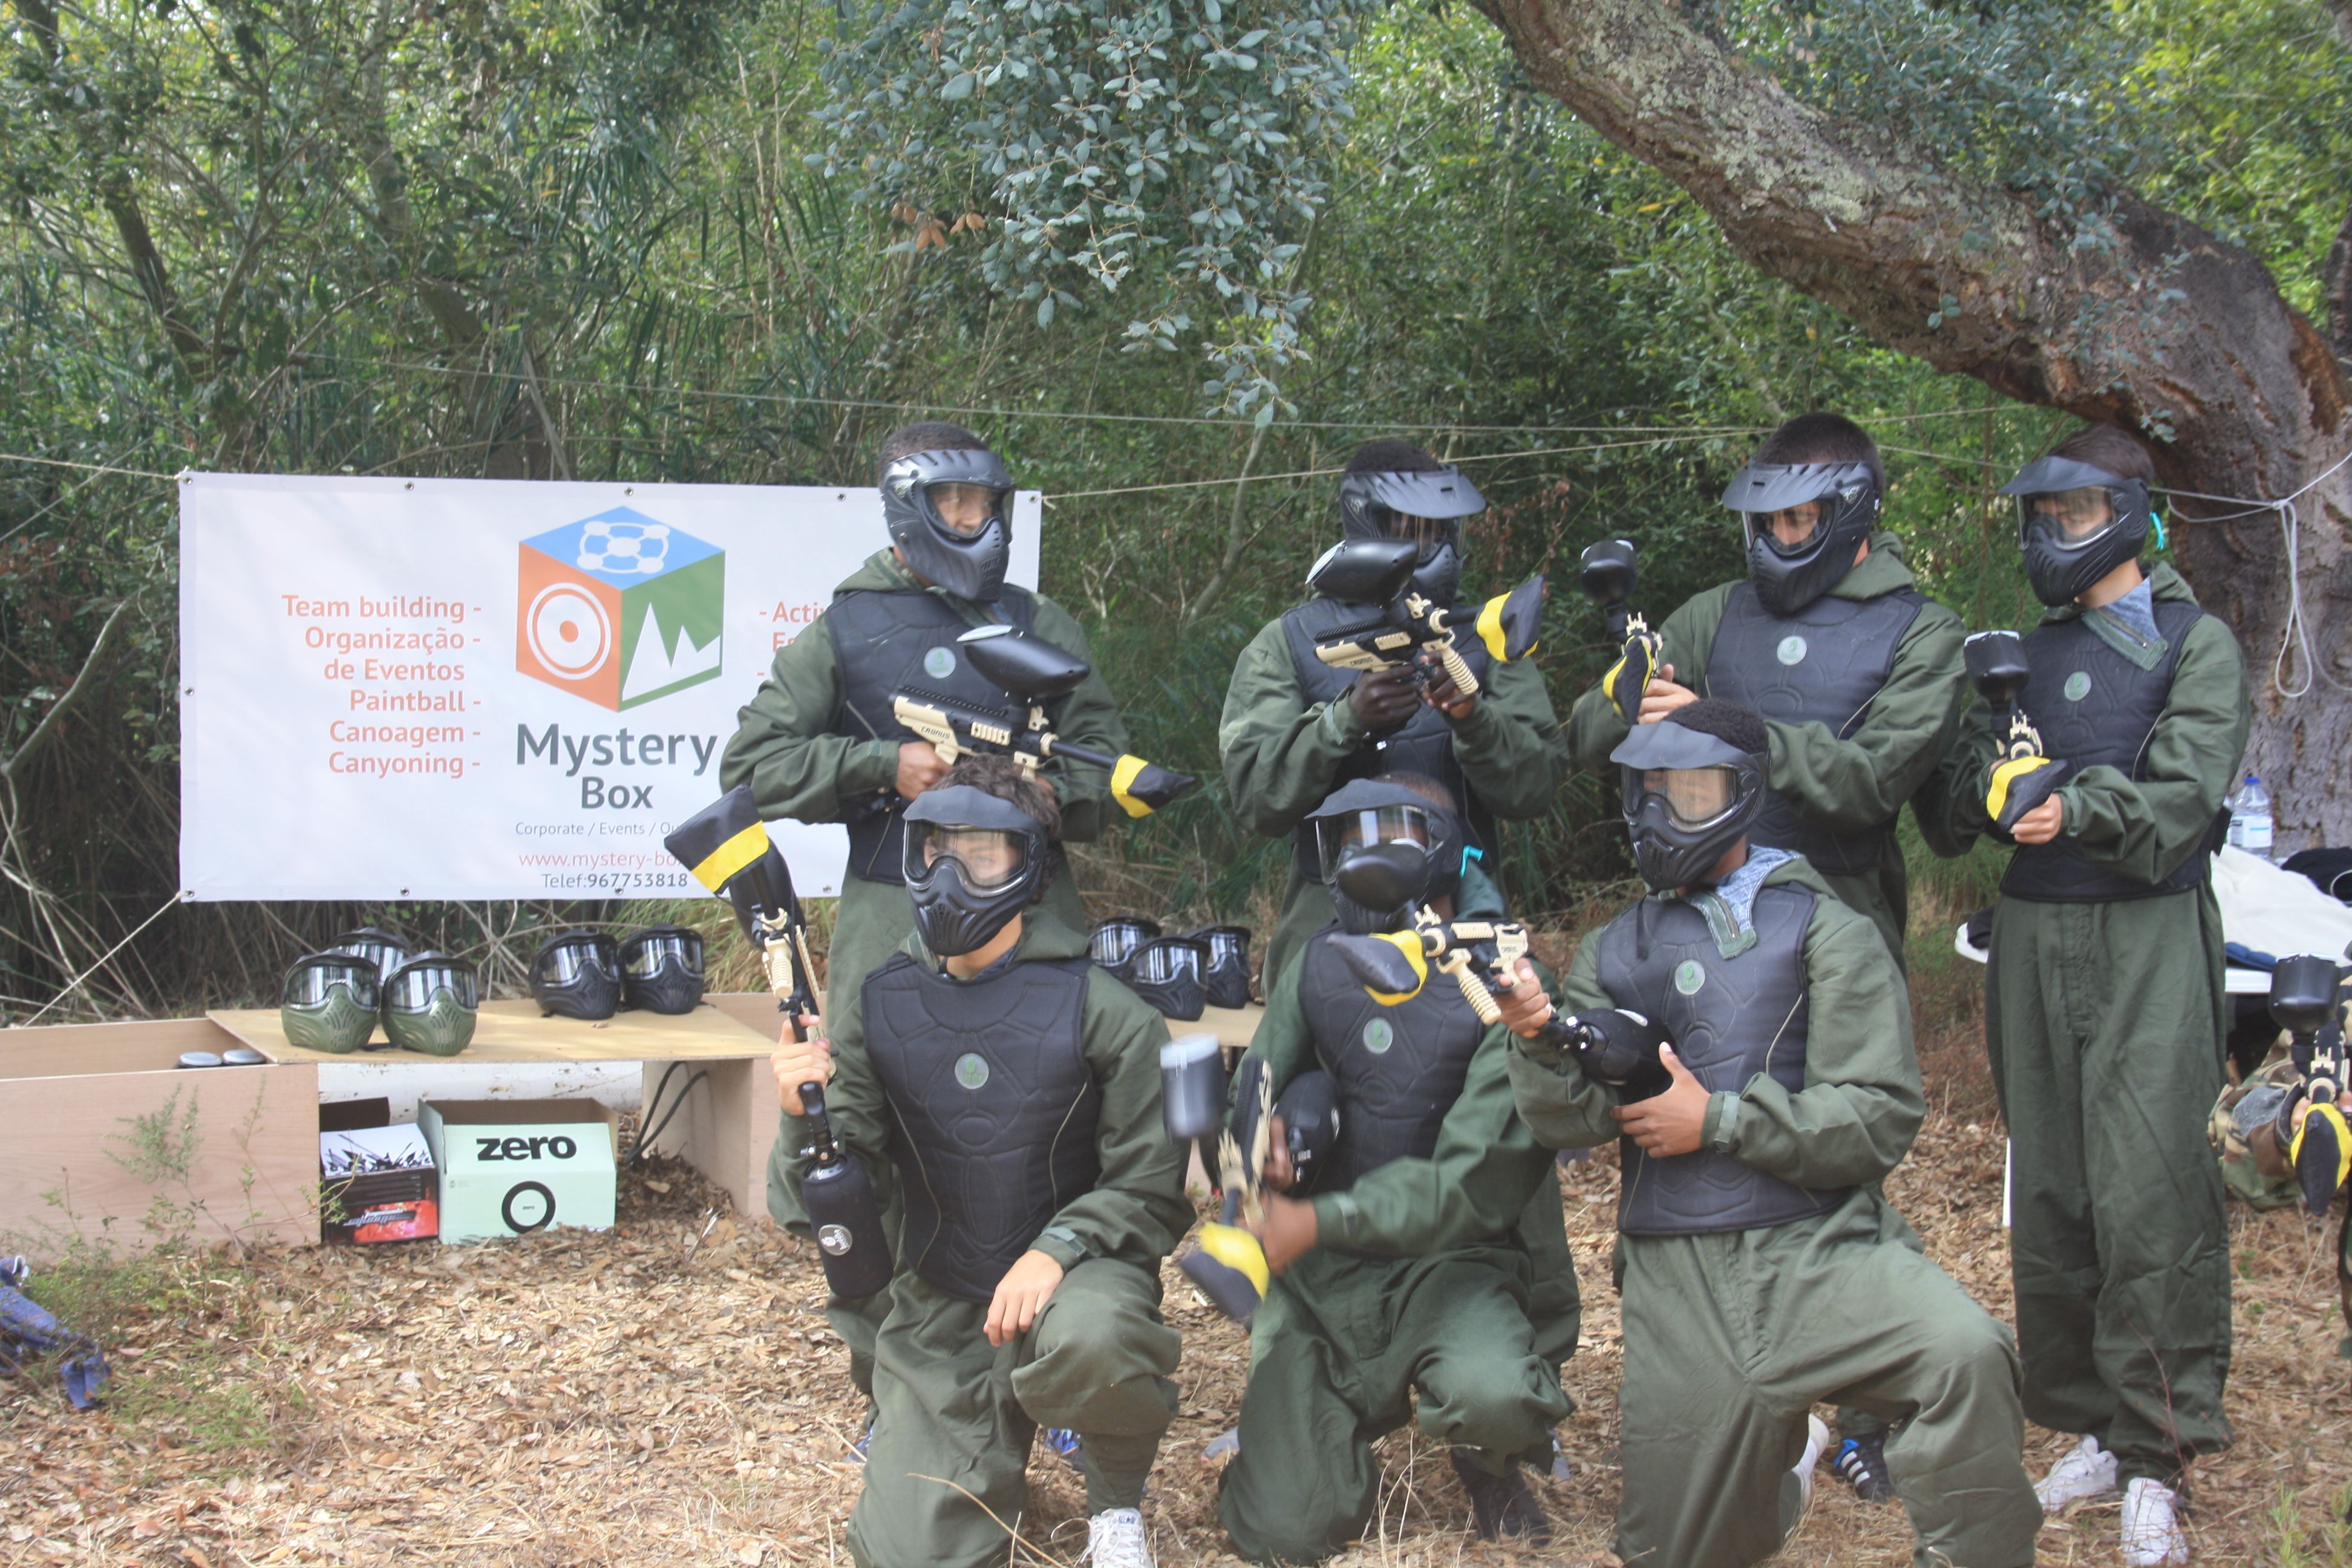 Paintball image